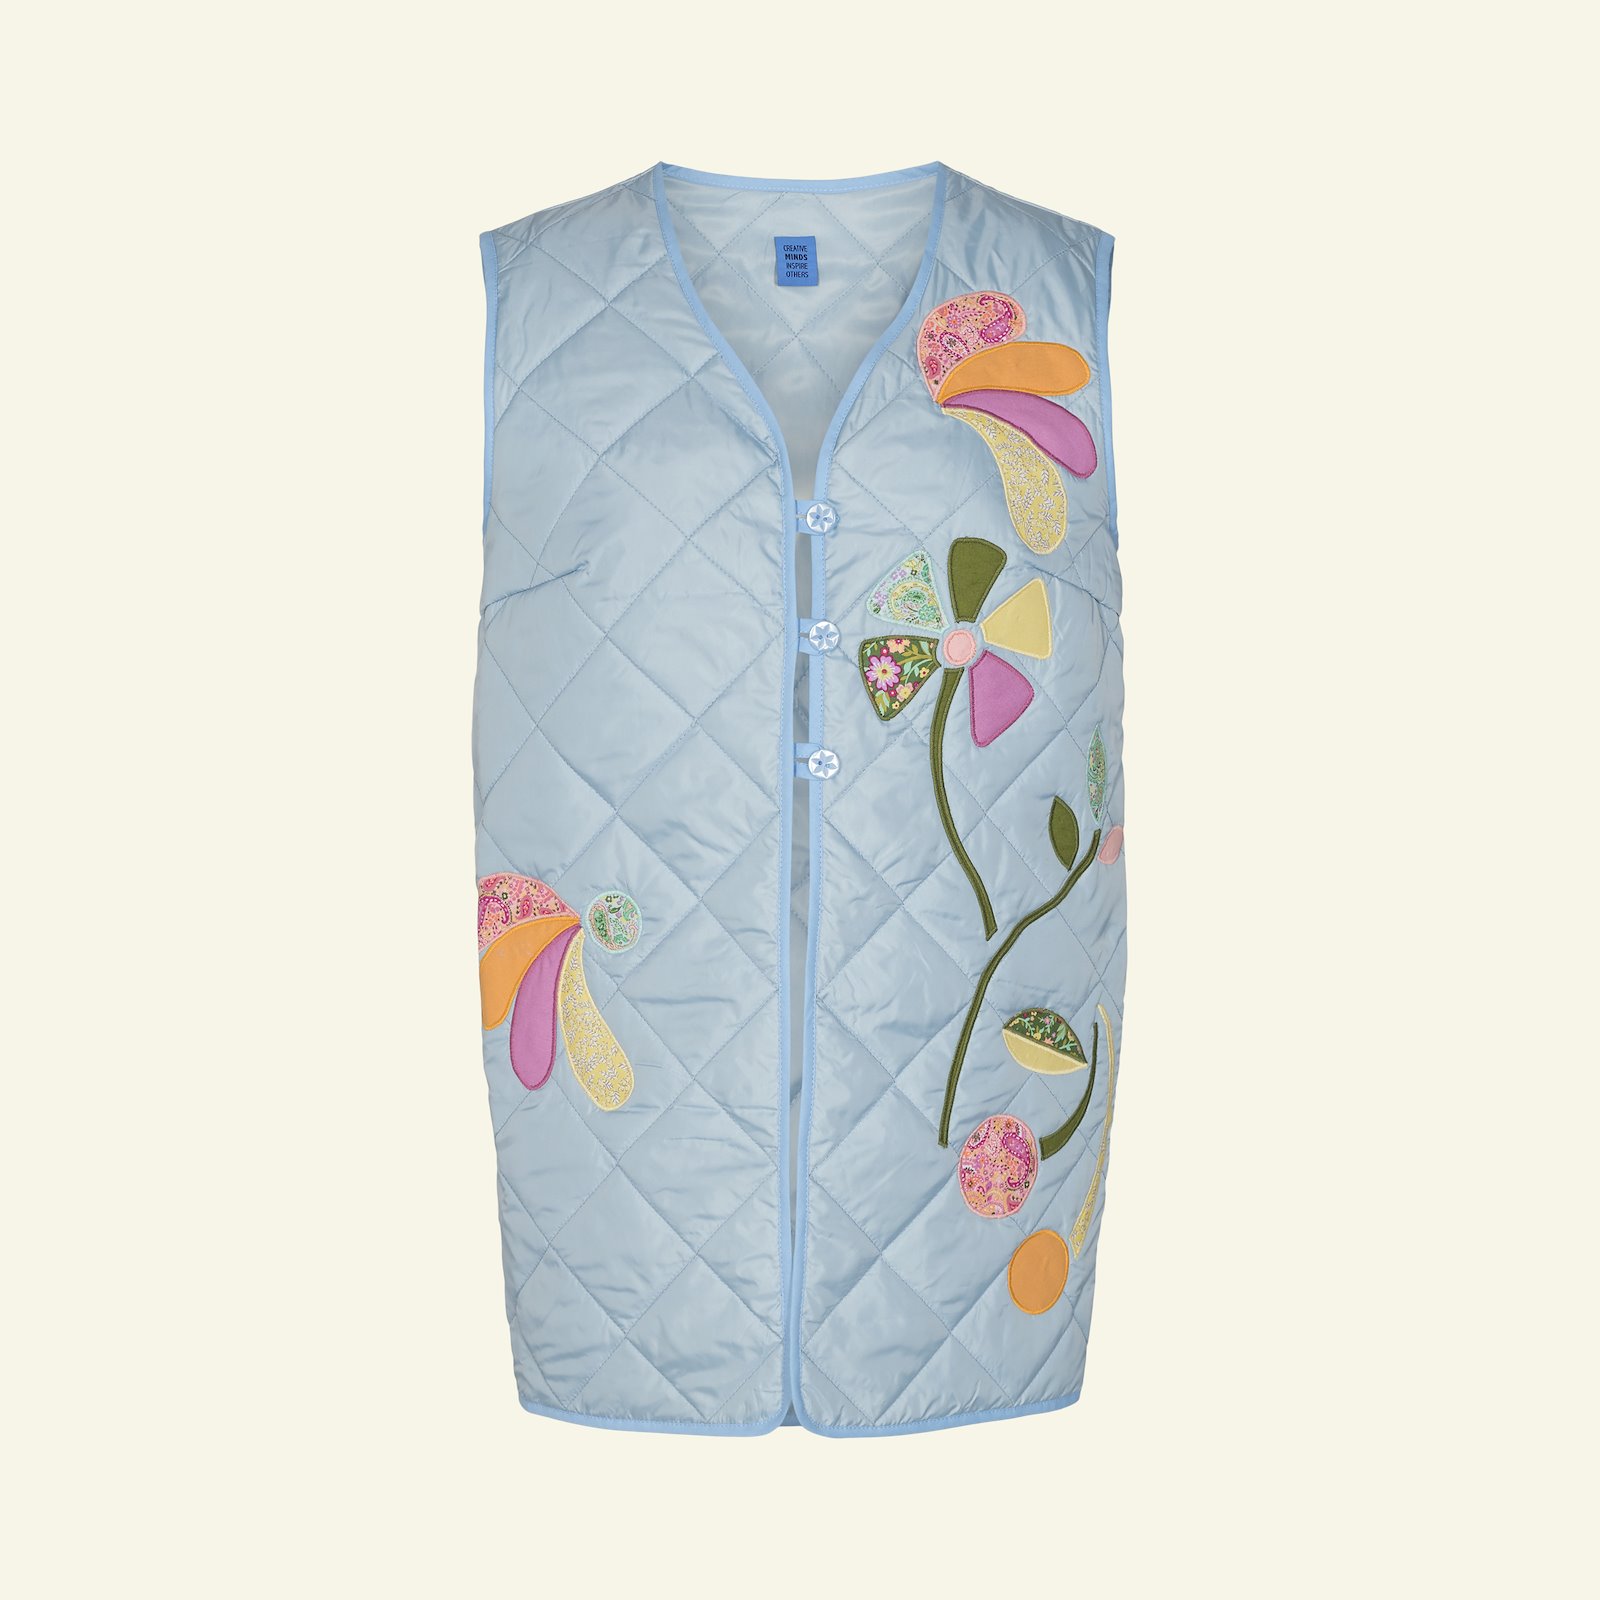 Quilted jacket and waistcoat, 38/10 p24047_920225_66019_33224_sskit